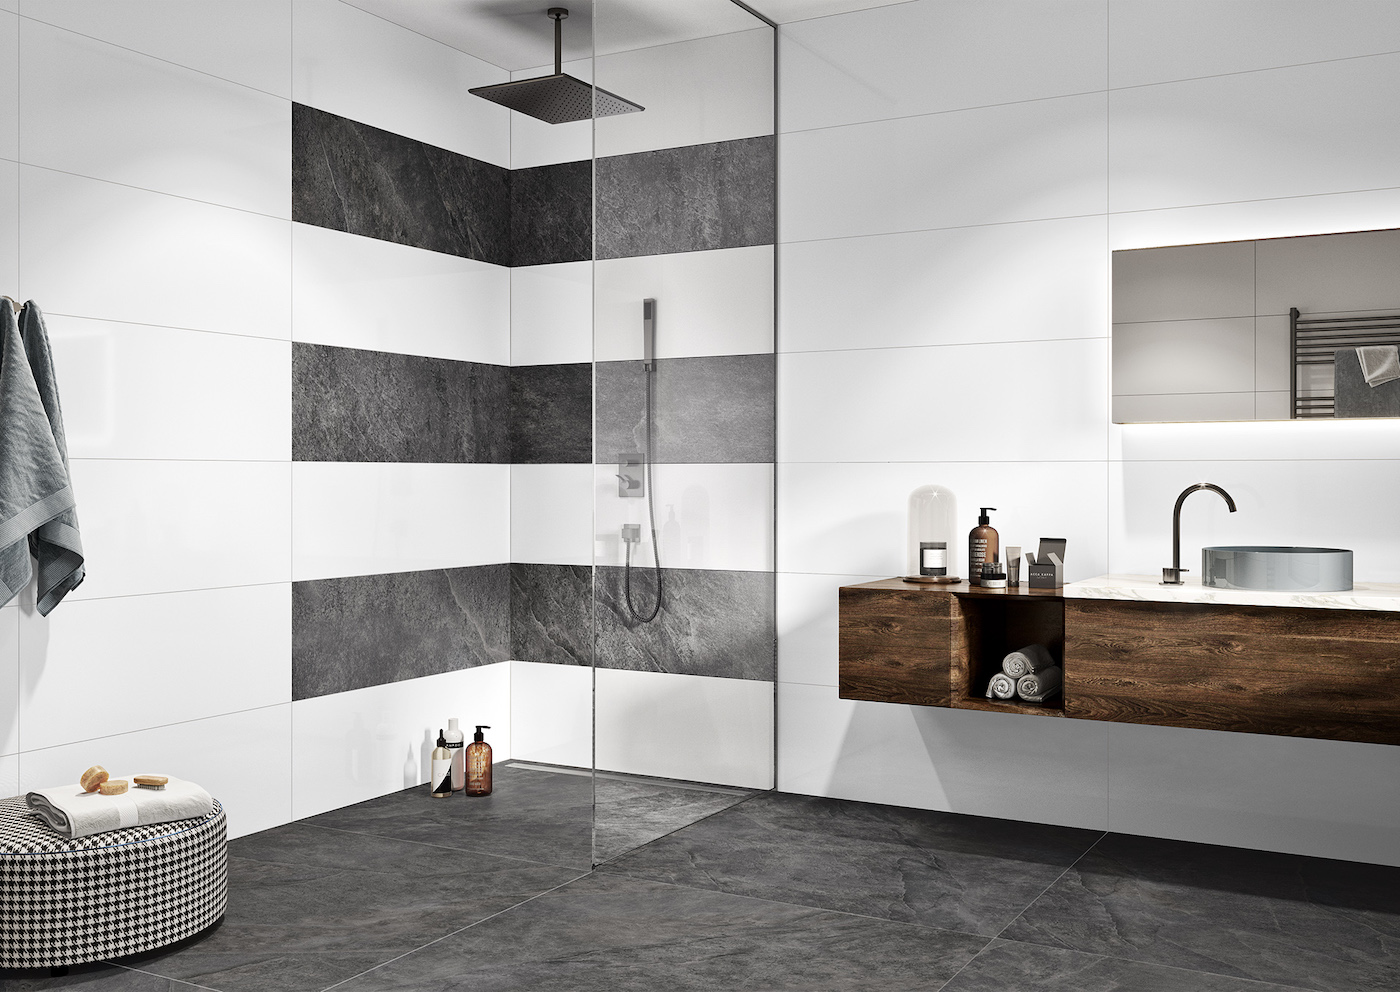 wall: Pure White #6MM Y12975001 white glossy 40x120 wall tile, 6mm, Kalmit #6MM Y12965001 graphite 40x120 porcelain gres, 6mm